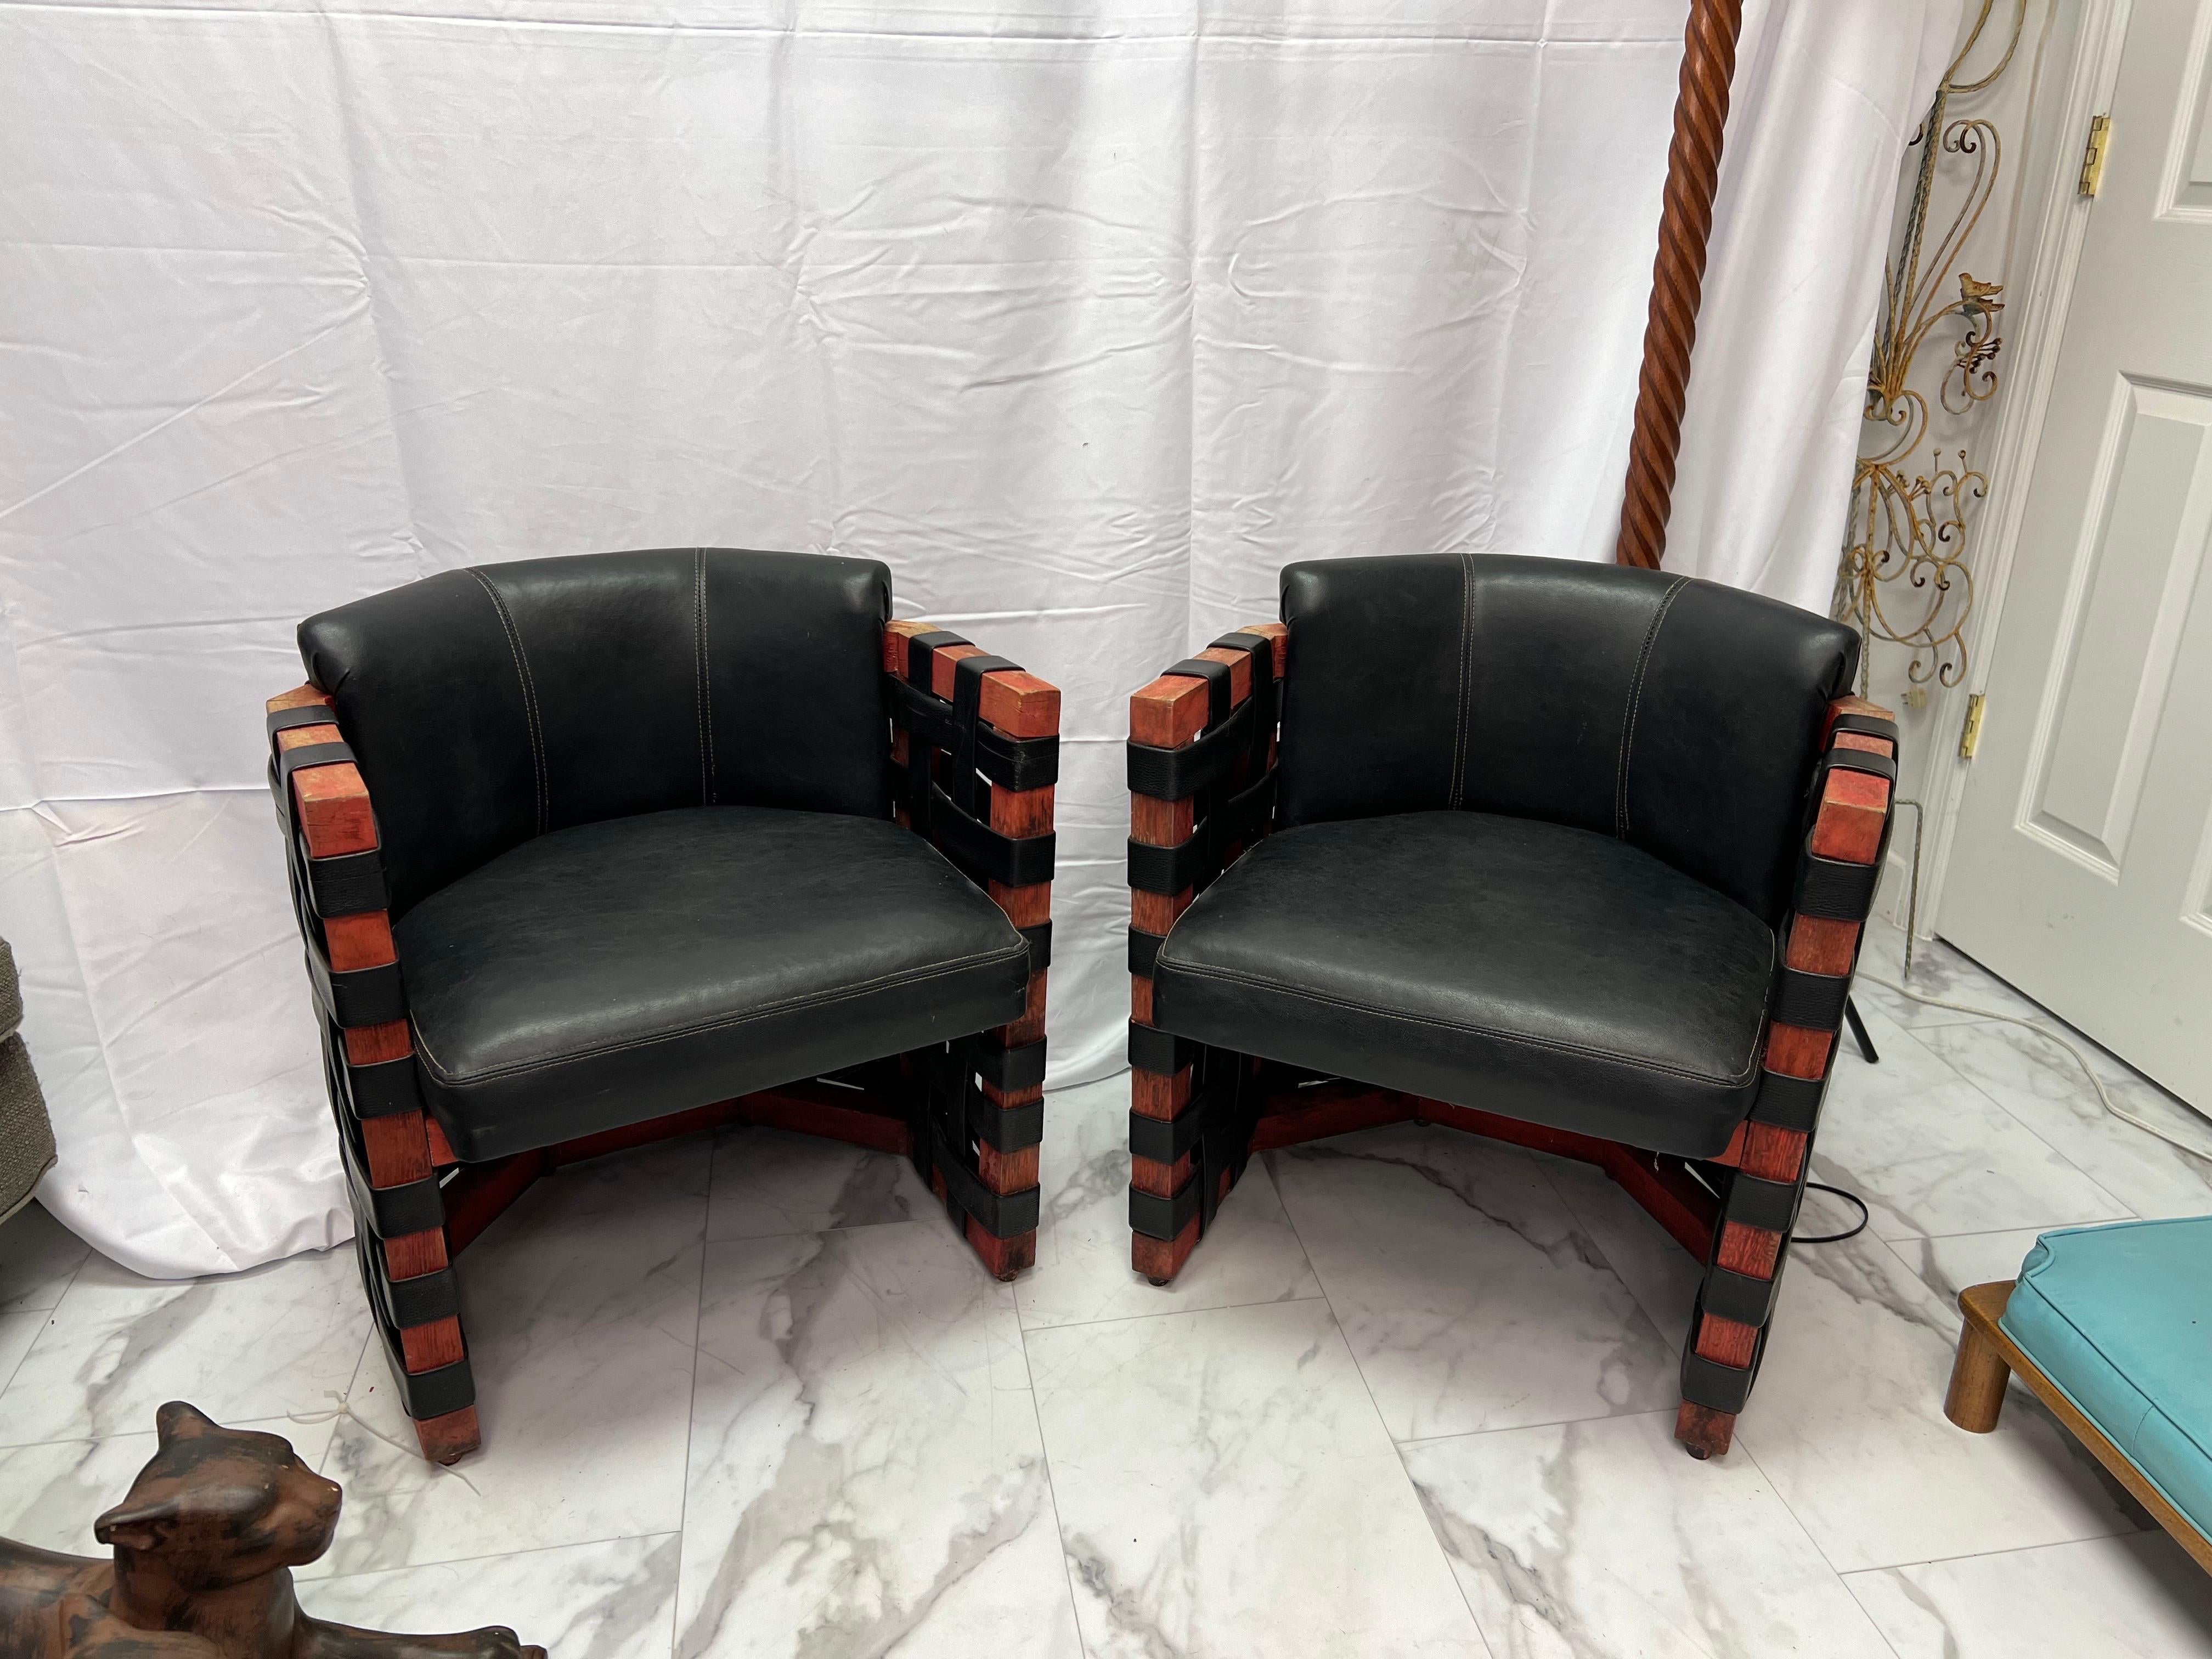 These fantastic chairs are statement pieces.  They are small in stature but comfortable and pack a punch in a room.   I even had a very tall man sit in them for an honest opinion on comfort.   The original red/orange finish has mostly come off, but